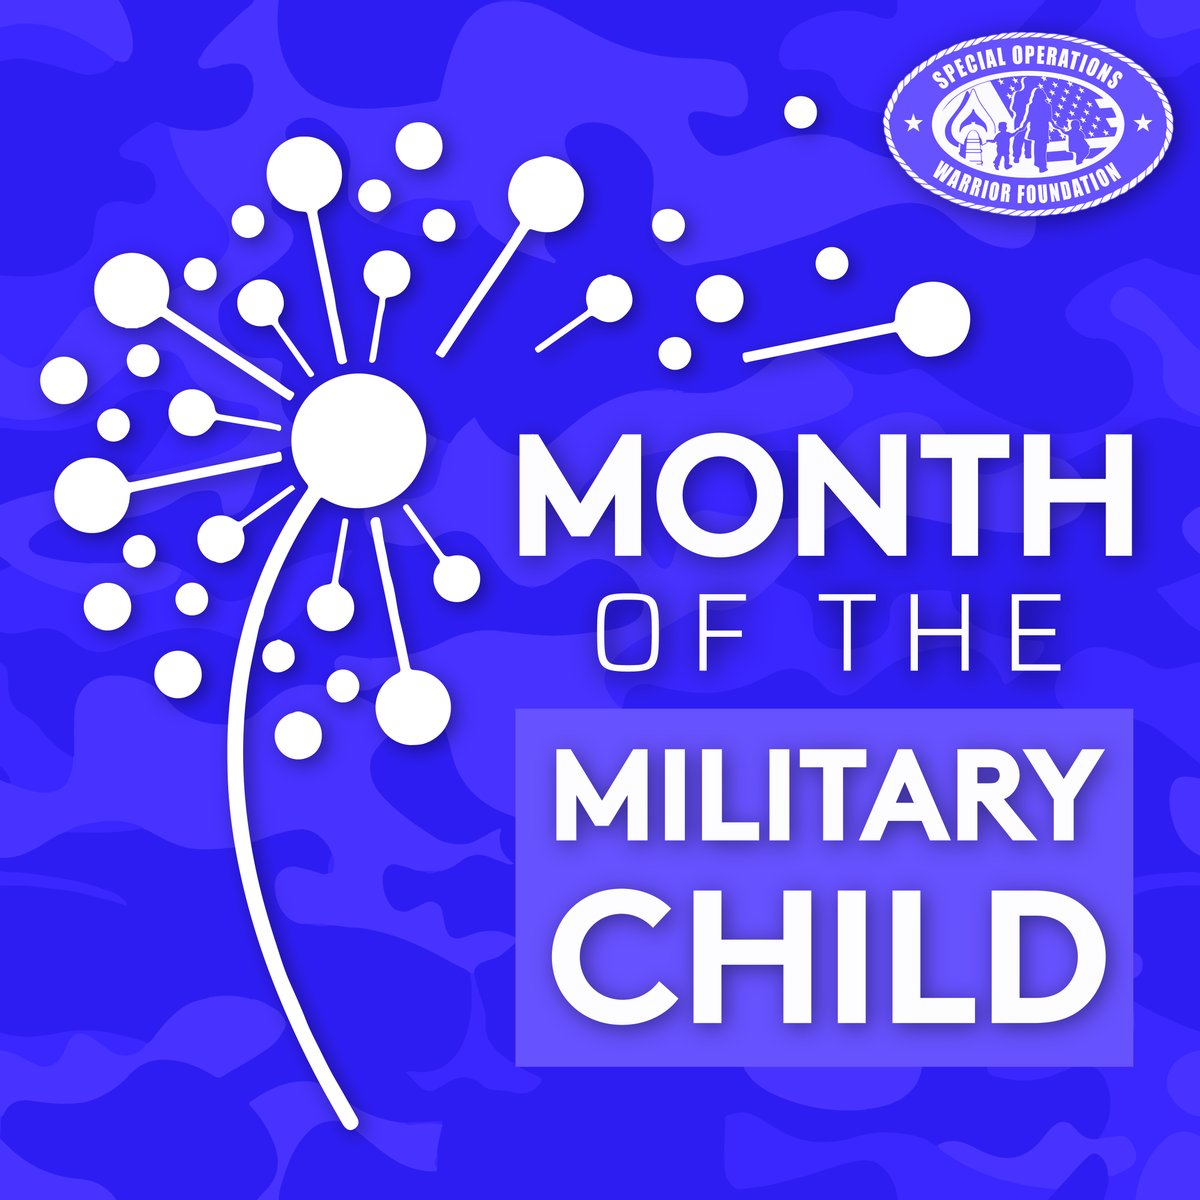 HONORING THE MONTH OF THE MILITARY CHILD 💙 Throughout April, we celebrate the incredible resilience, courage, and sacrifices made by military children worldwide. To all the military children out there: your bravery doesn't go unnoticed. #MonthoftheMilitaryChild